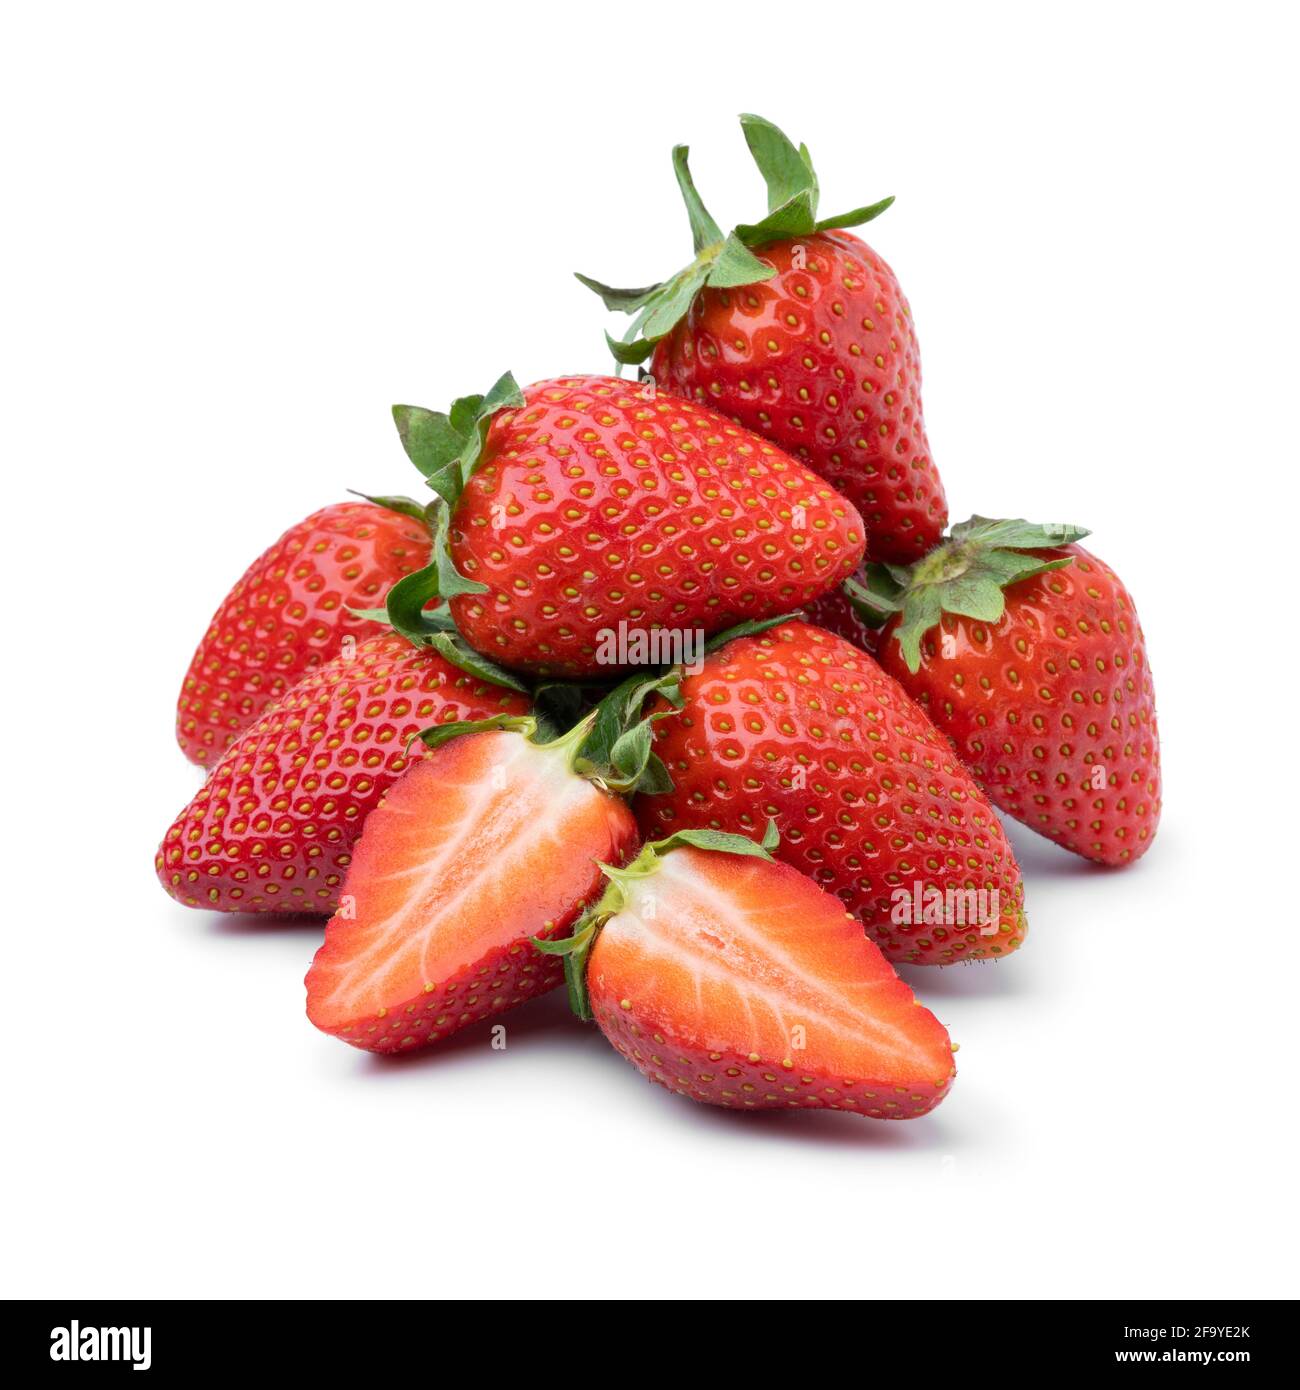 Heap of fresh picked whole and half ripe red strawberries isolated on white background Stock Photo